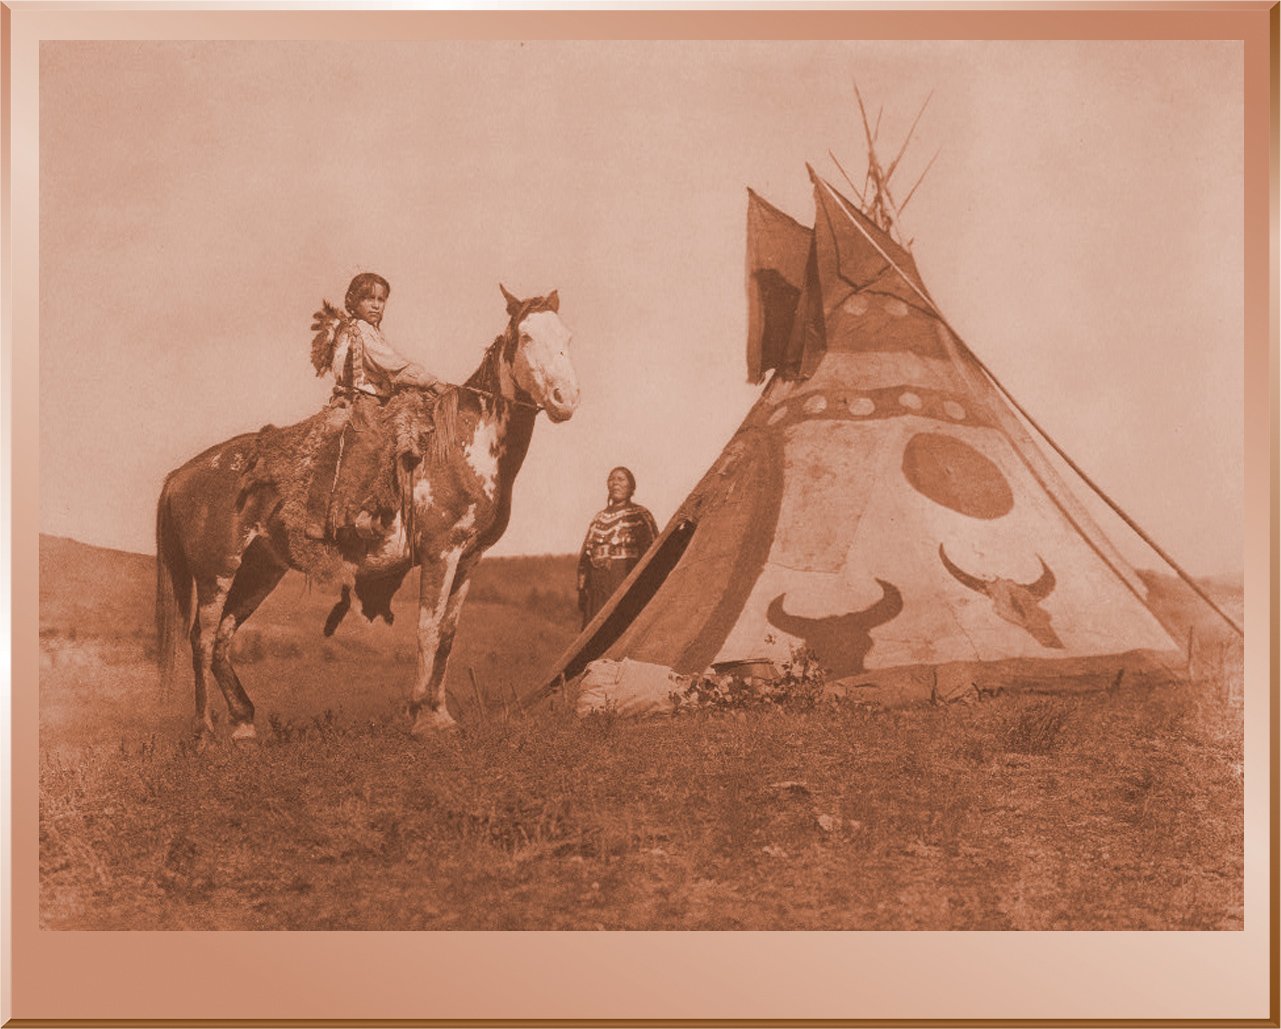 A Painted Tipi - Assiniboin